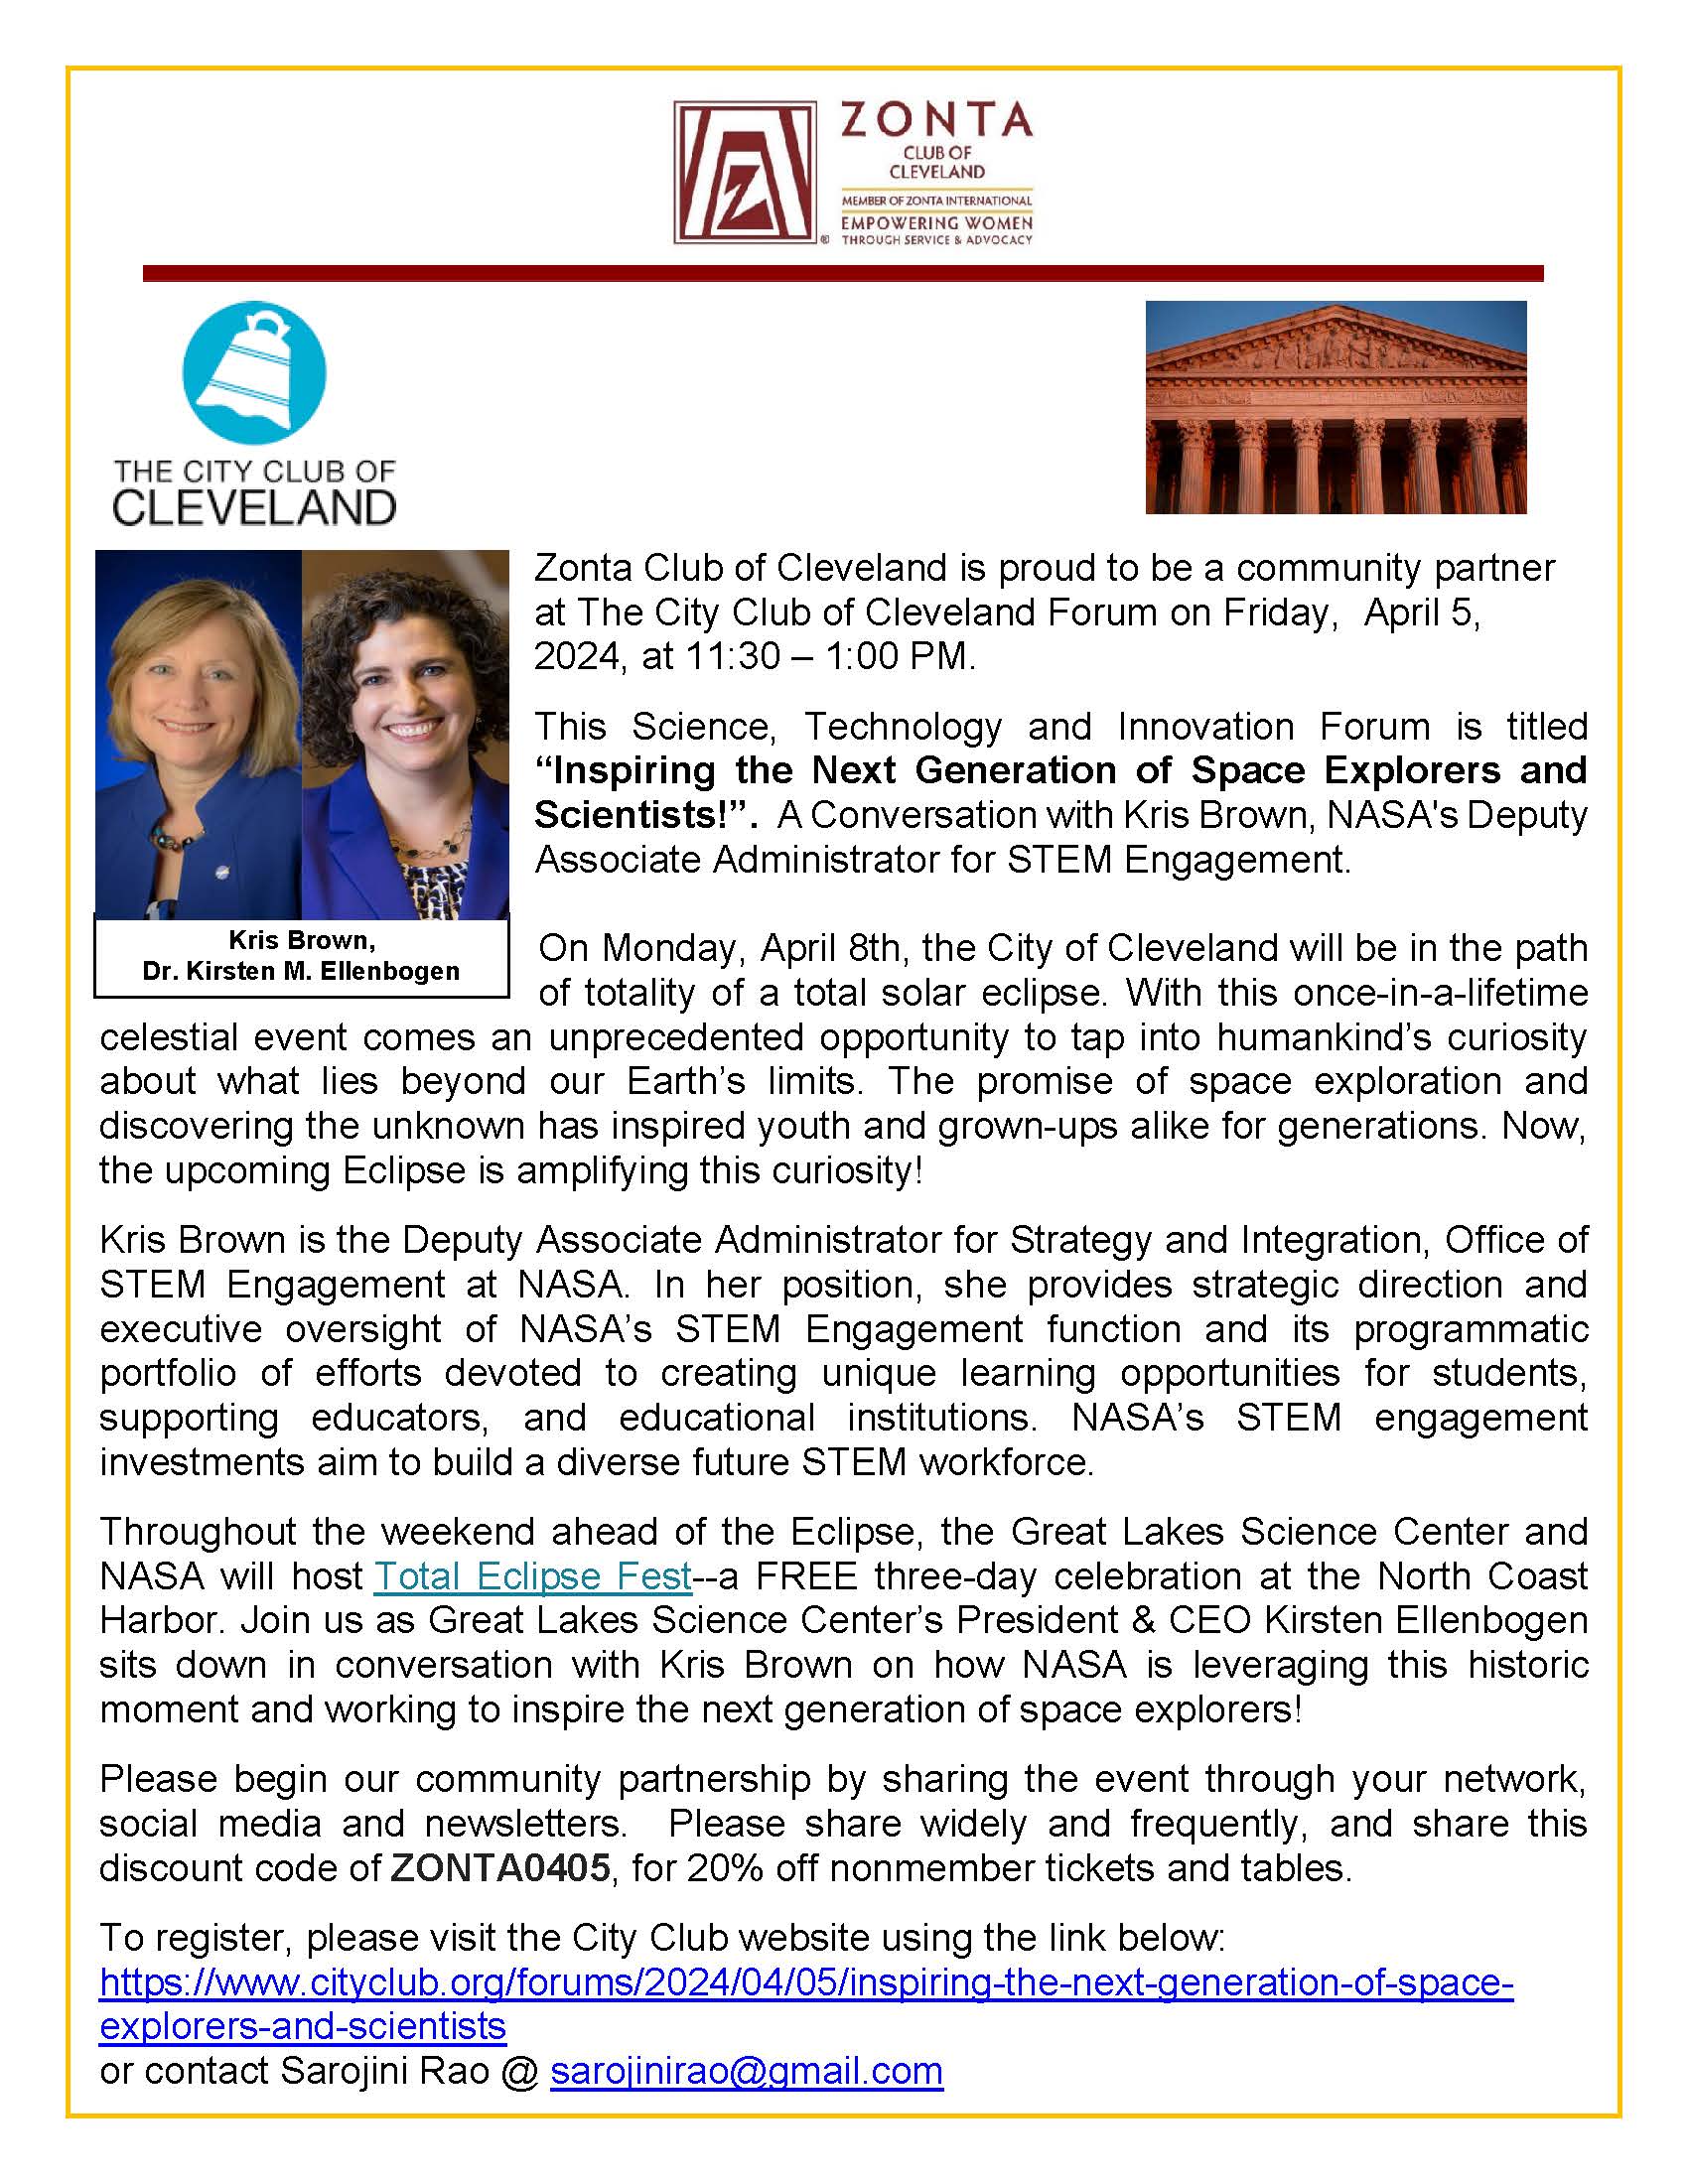 Zonta Cleveland Sponsors Science, Technology and Innovation Forum  at the City Club of Cleveland